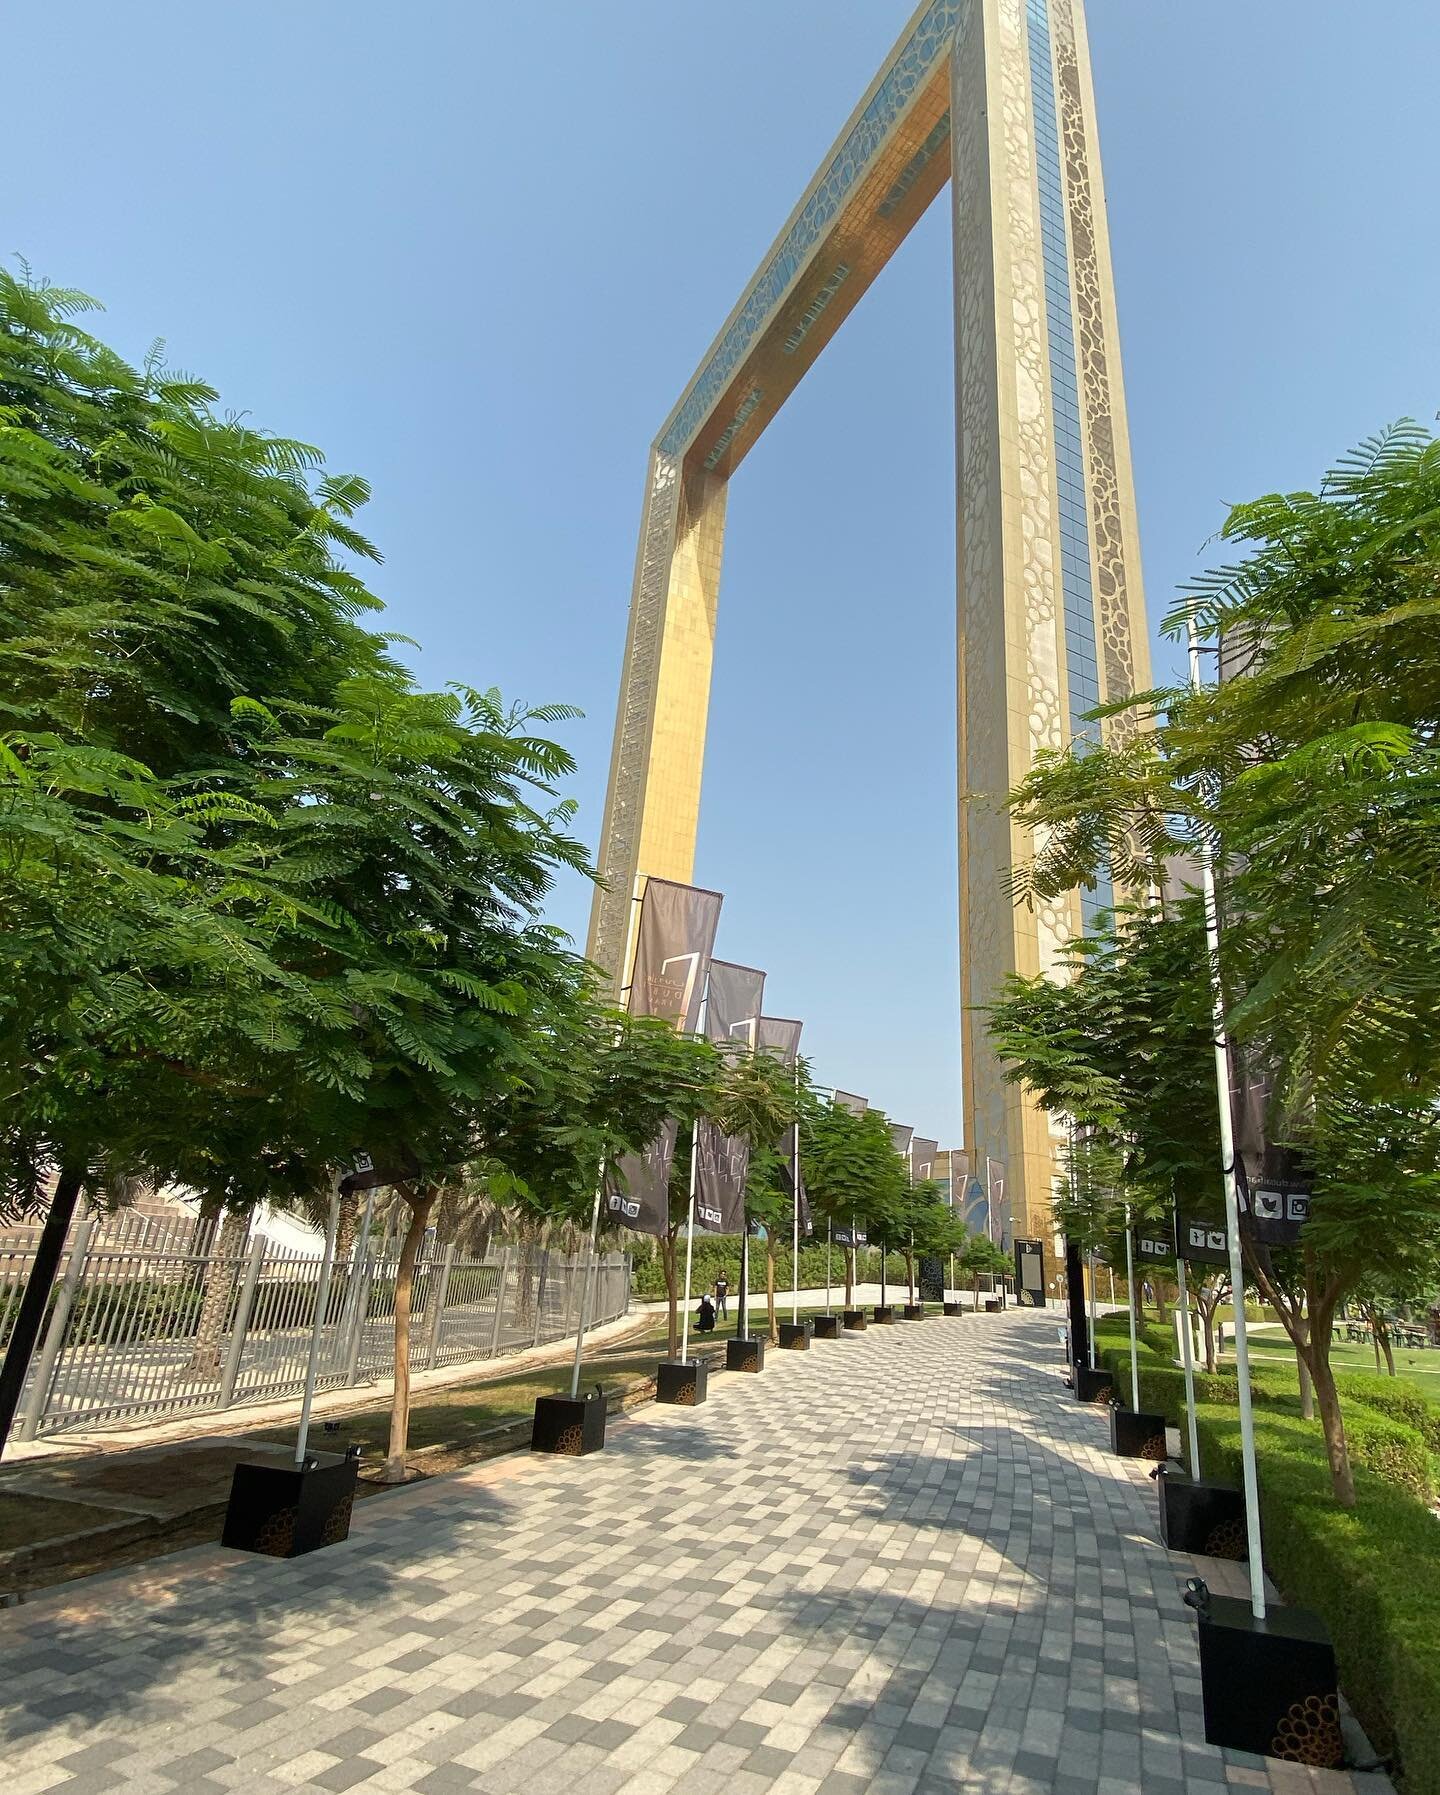 Another day, another marvel. This is the Dubai Frame, a new structure celebrating the history and future of Dubai.